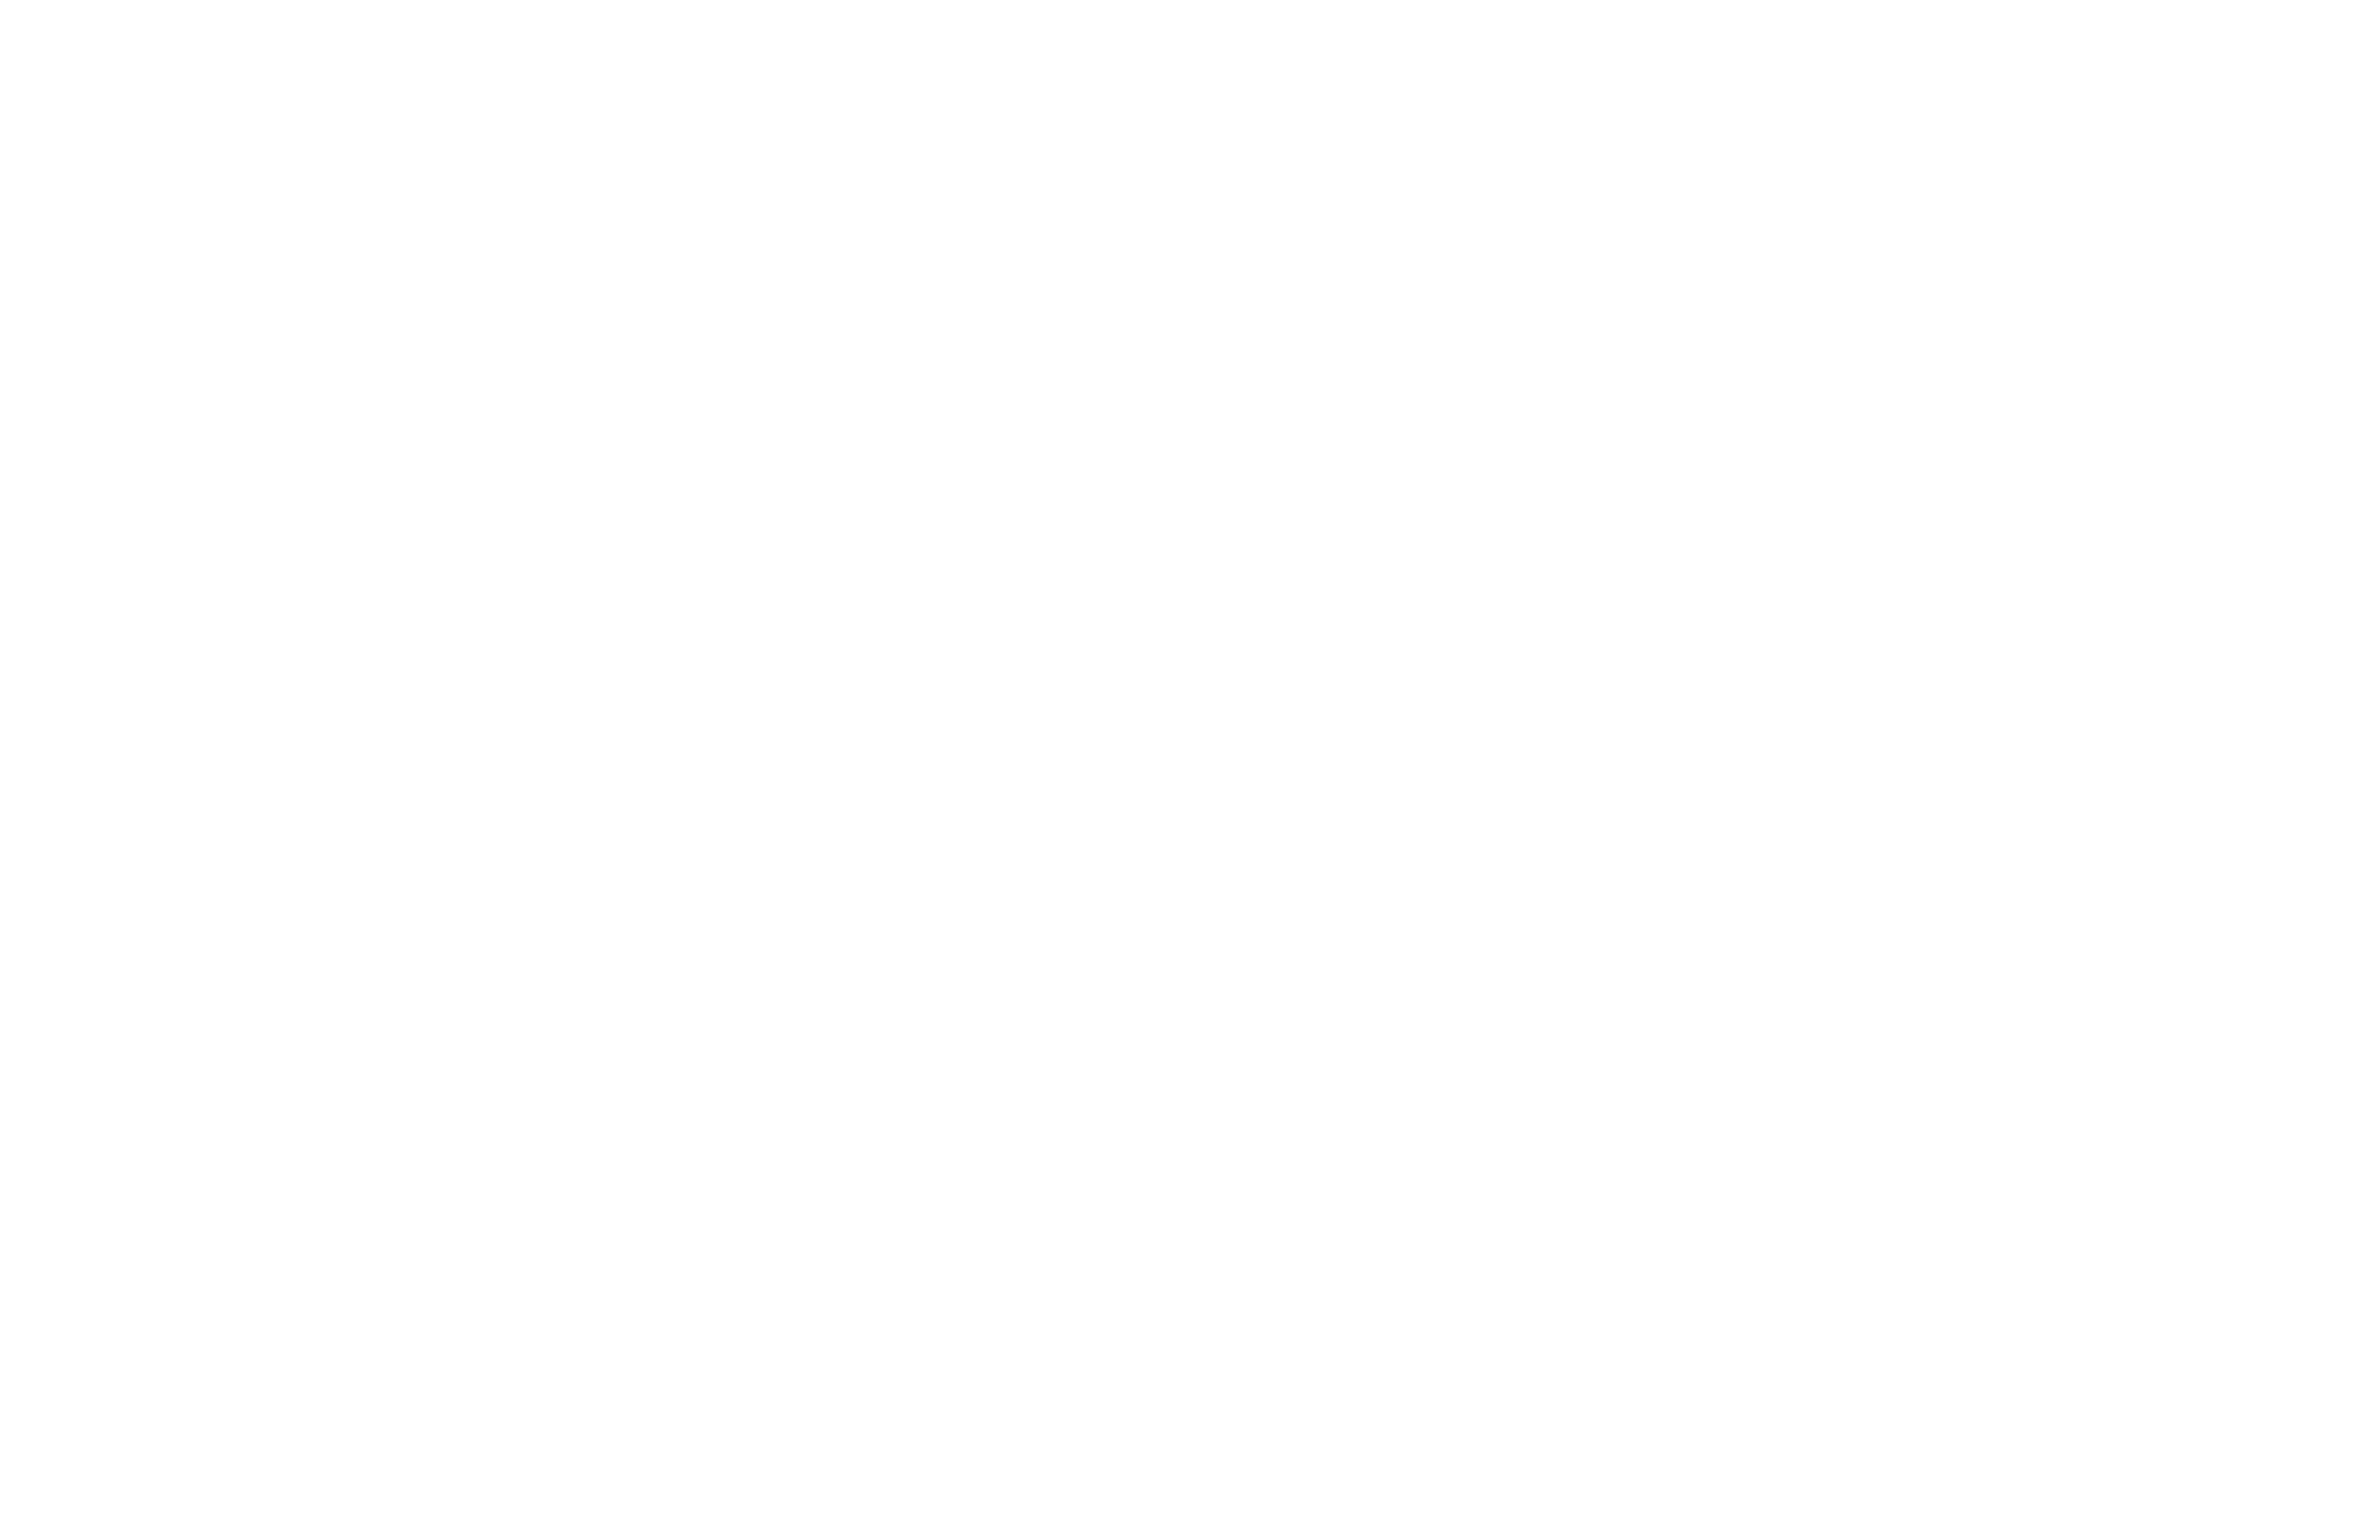 Avalanche Pictures Company Logo